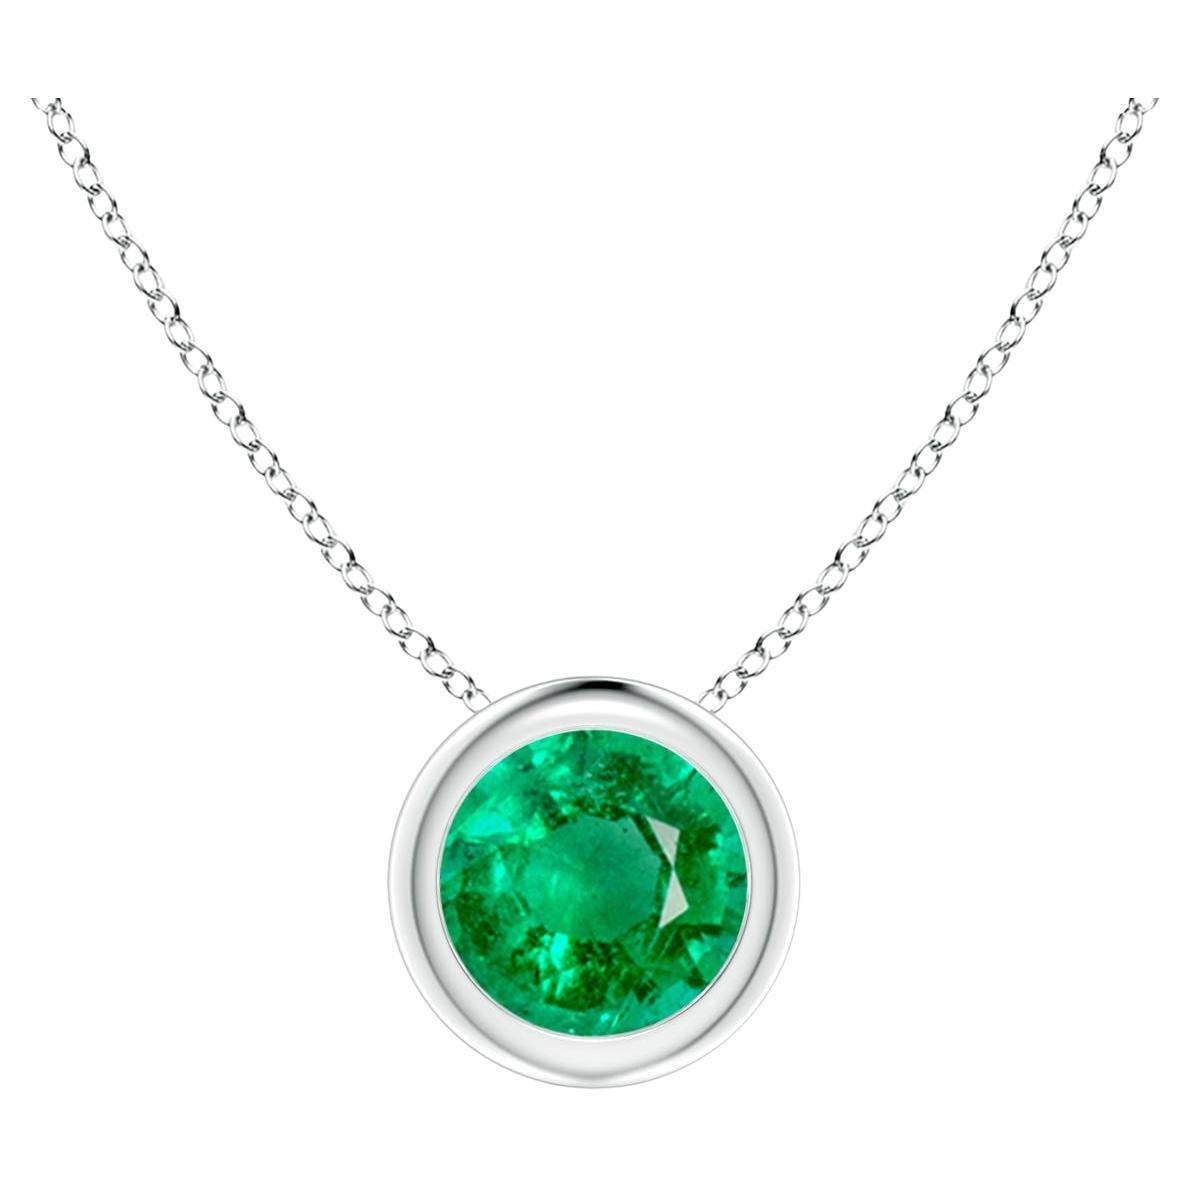 Natural Bezel-Set Round Emerald Solitaire Pendant in 14K White Gold (5mm)